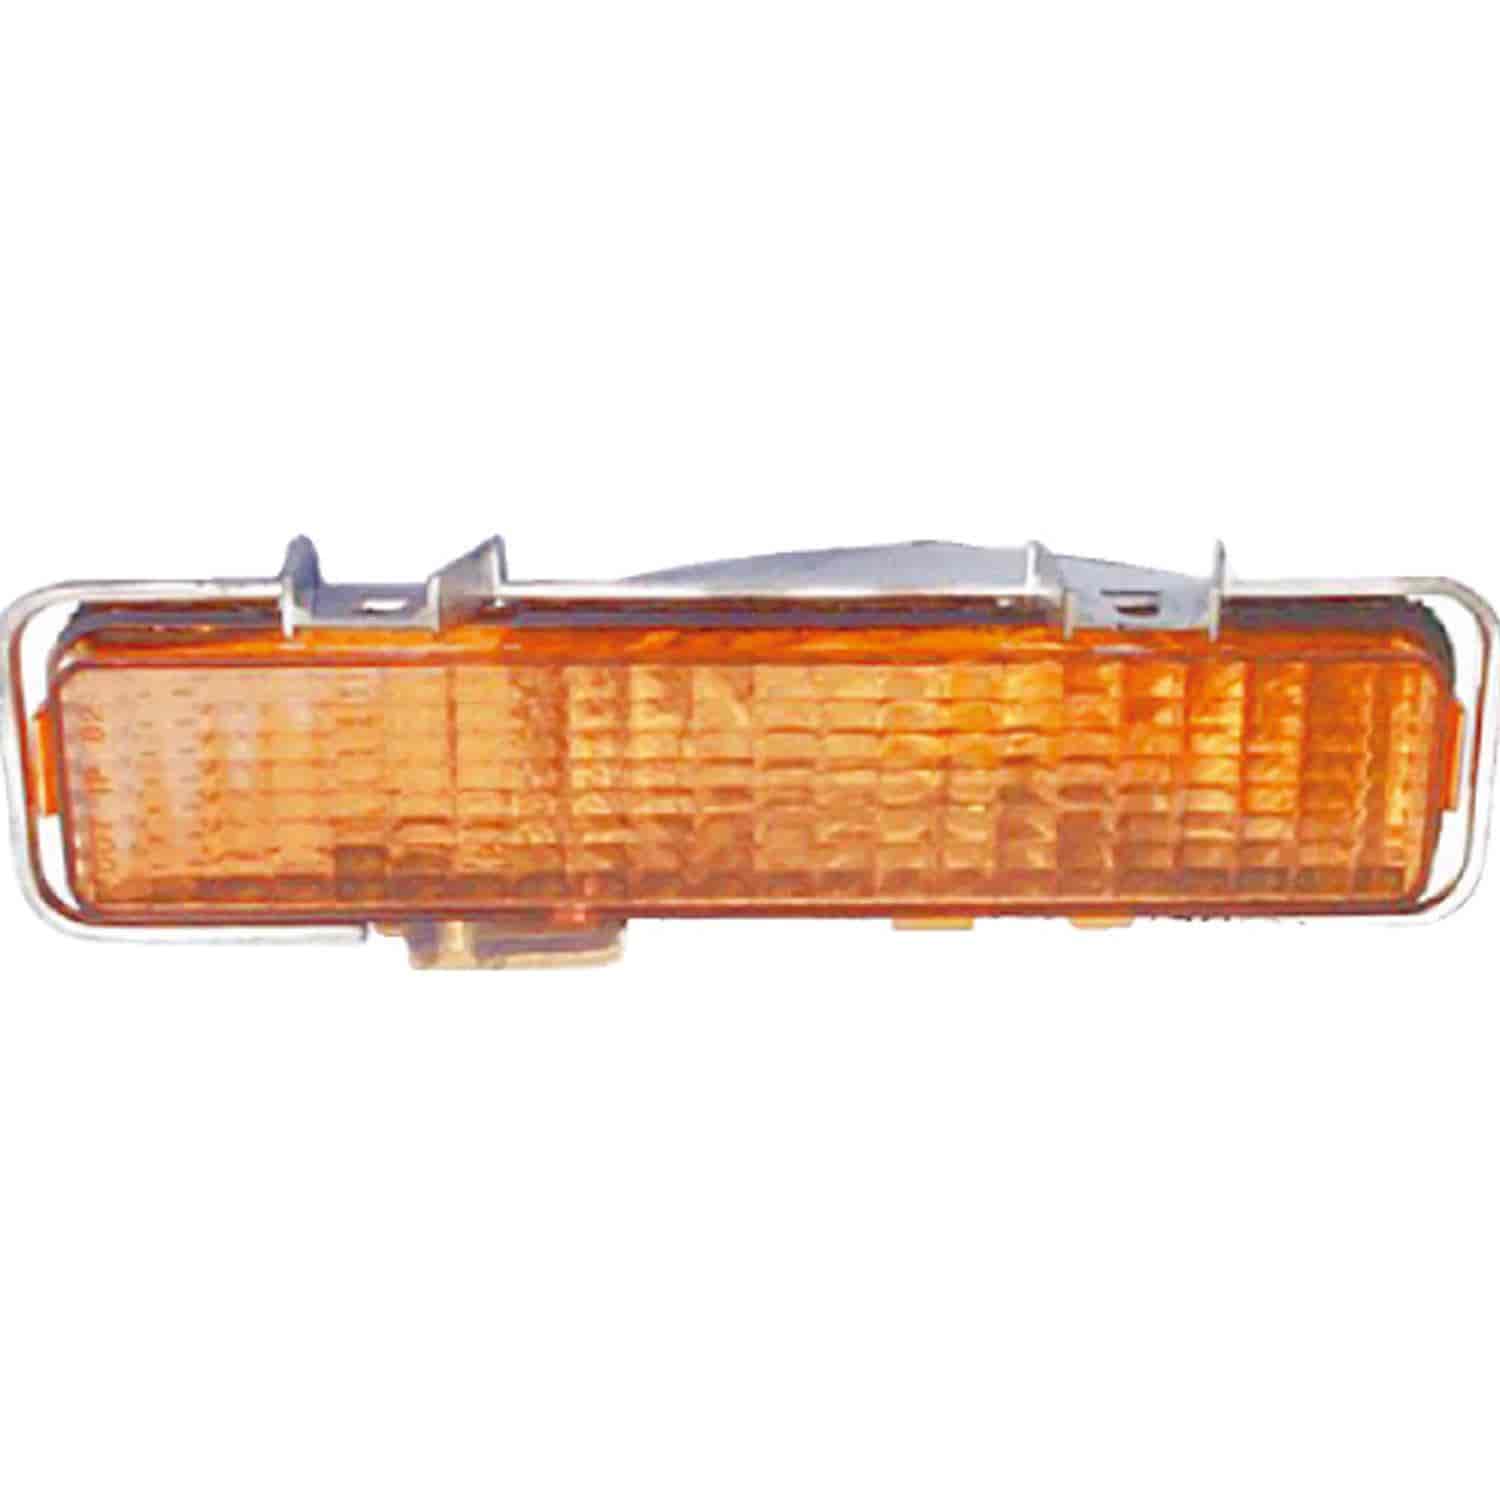 Parking / Turn Signal Lamp Assembly 1982-1994 Chevrolet, GMC; 1991-1994 Oldsmobile